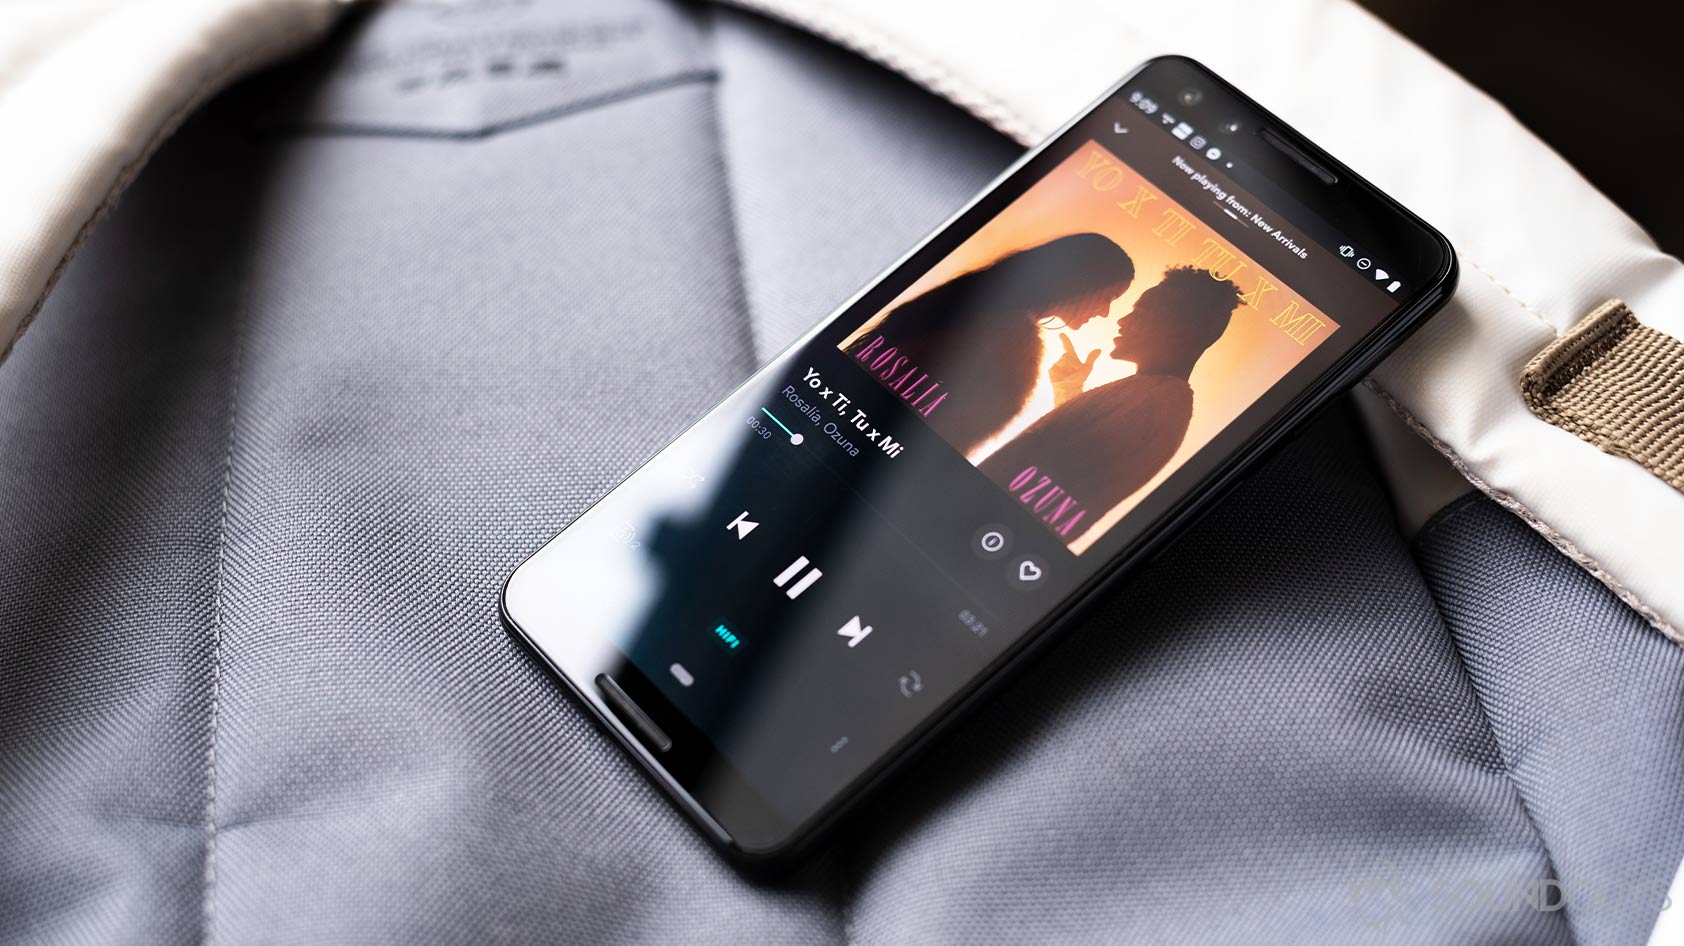 Tidal HiFi mobile app on a Google Pixel 3, which is resting on the underside of a backpack.